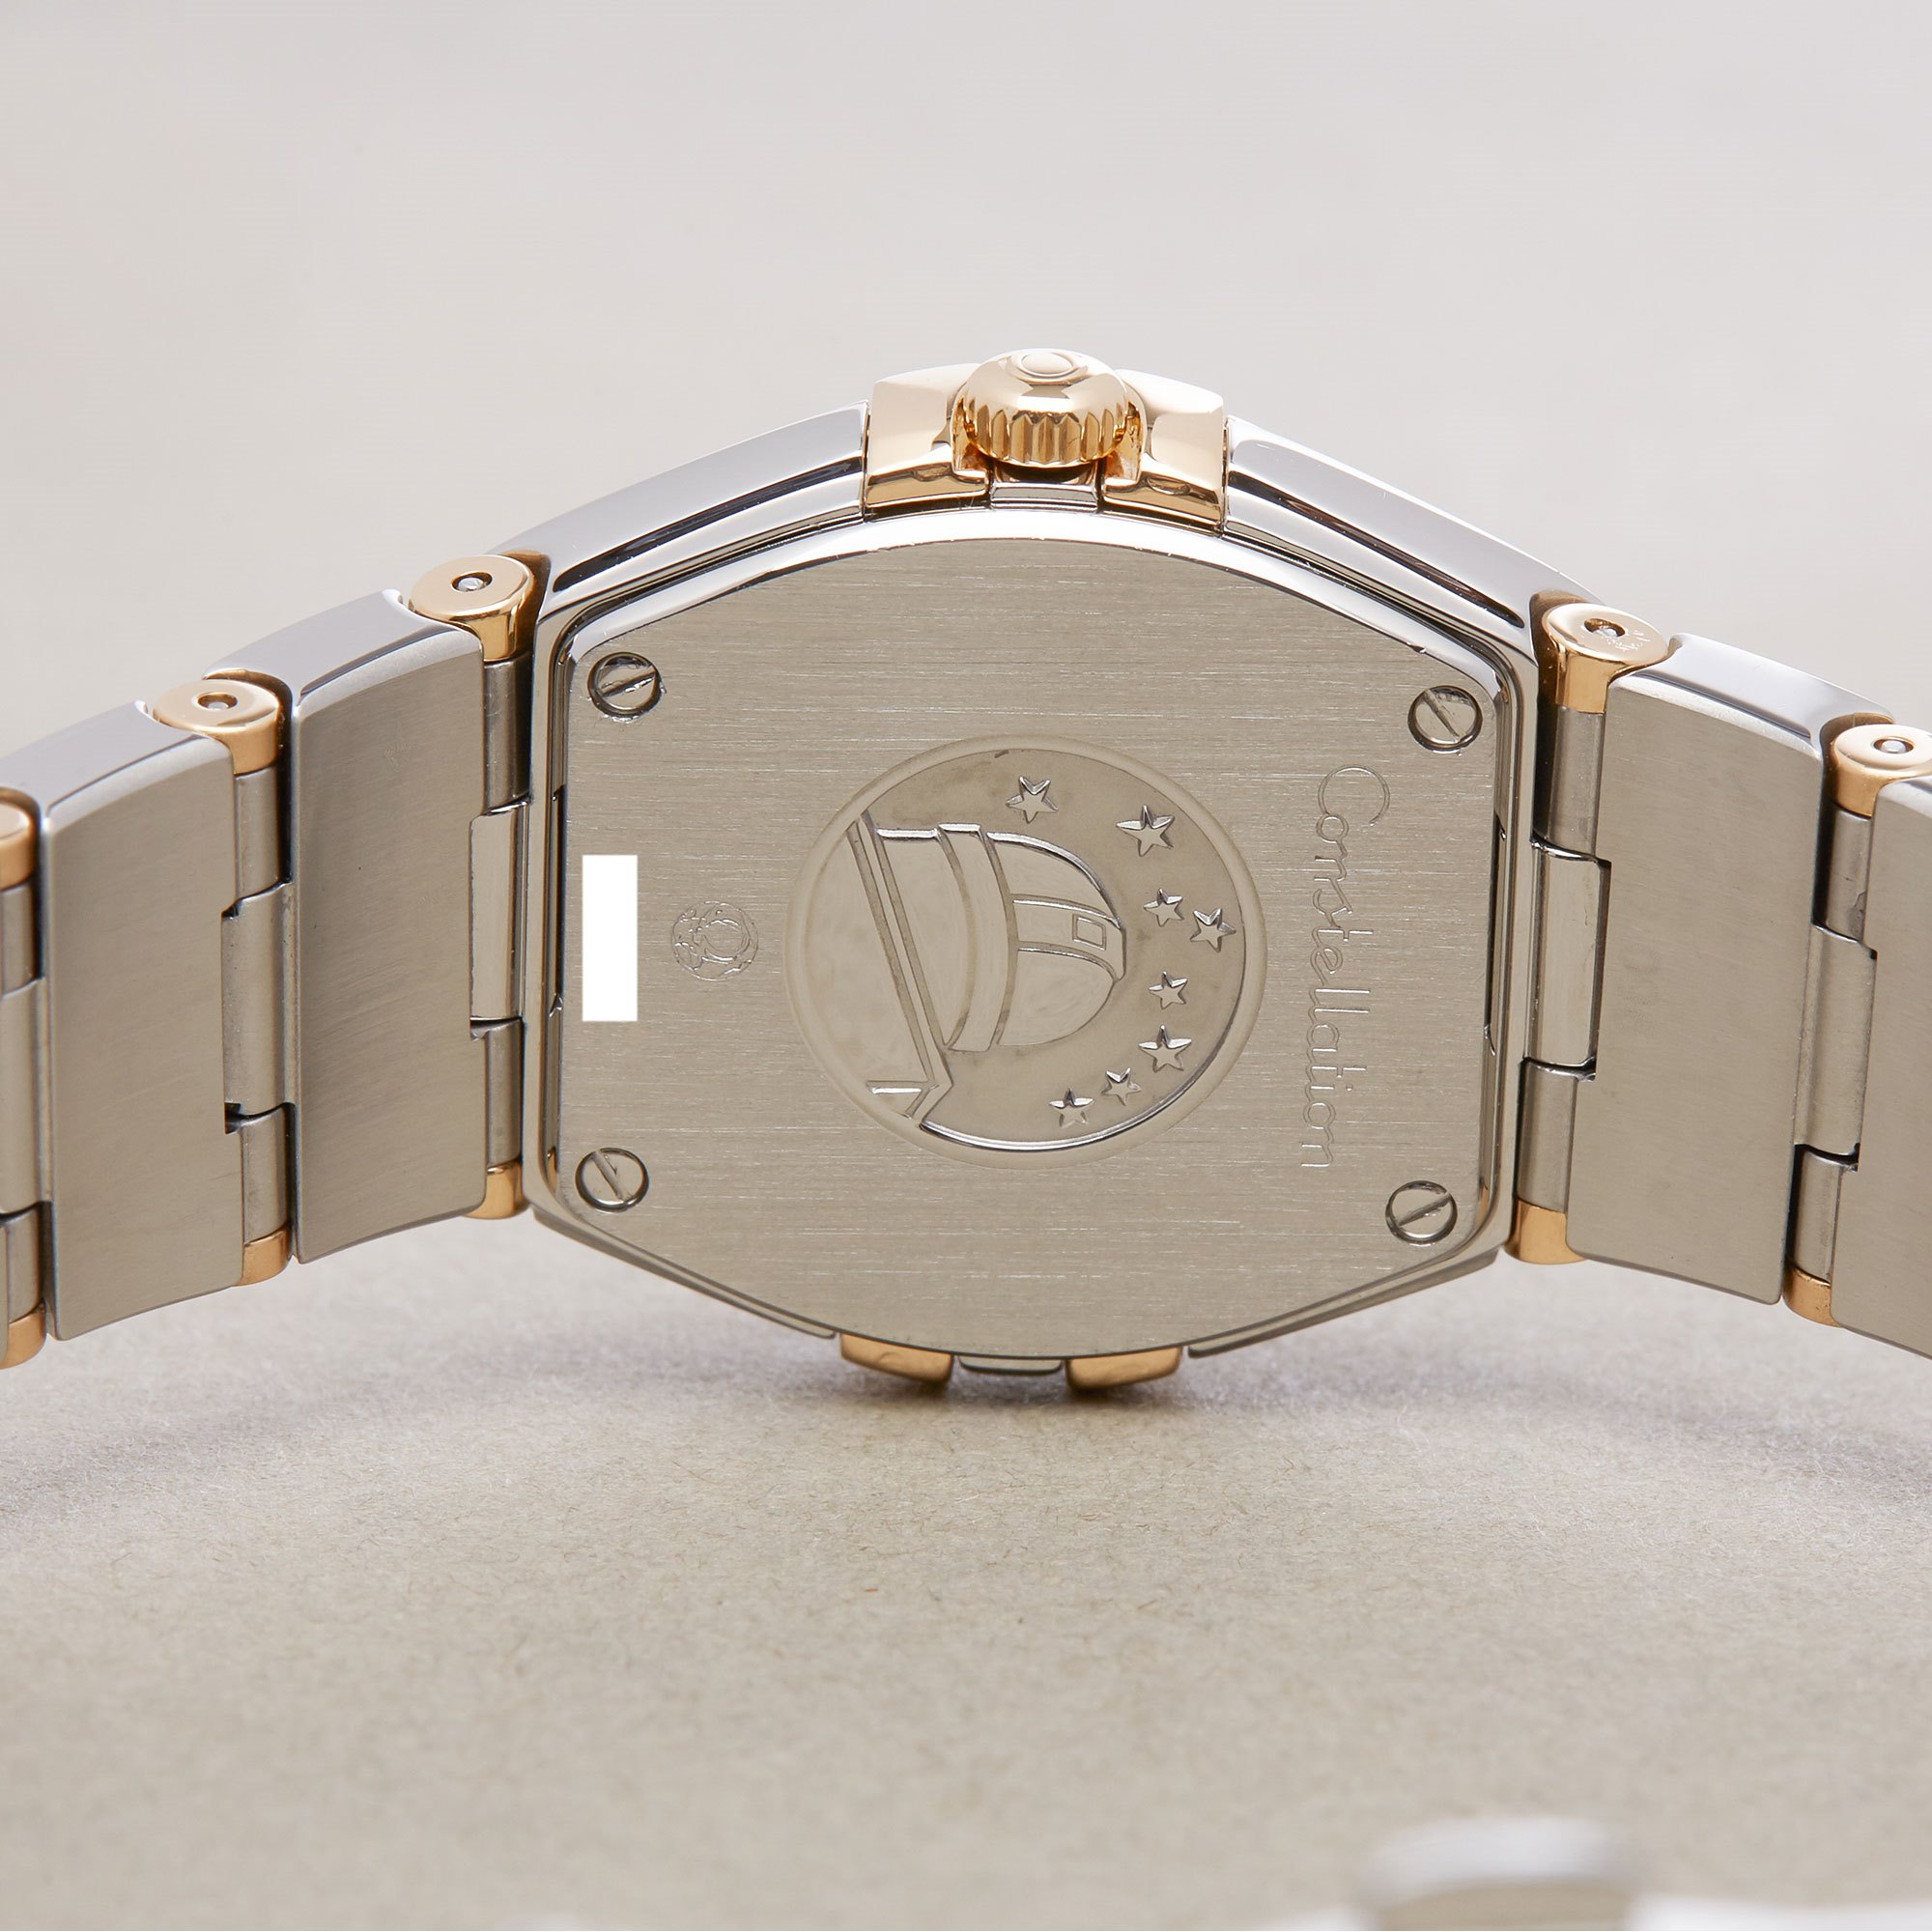 Omega Constellation 18K Yellow Gold & Stainless Steel Watch 123.20.24.60.05.002 - Image 7 of 12